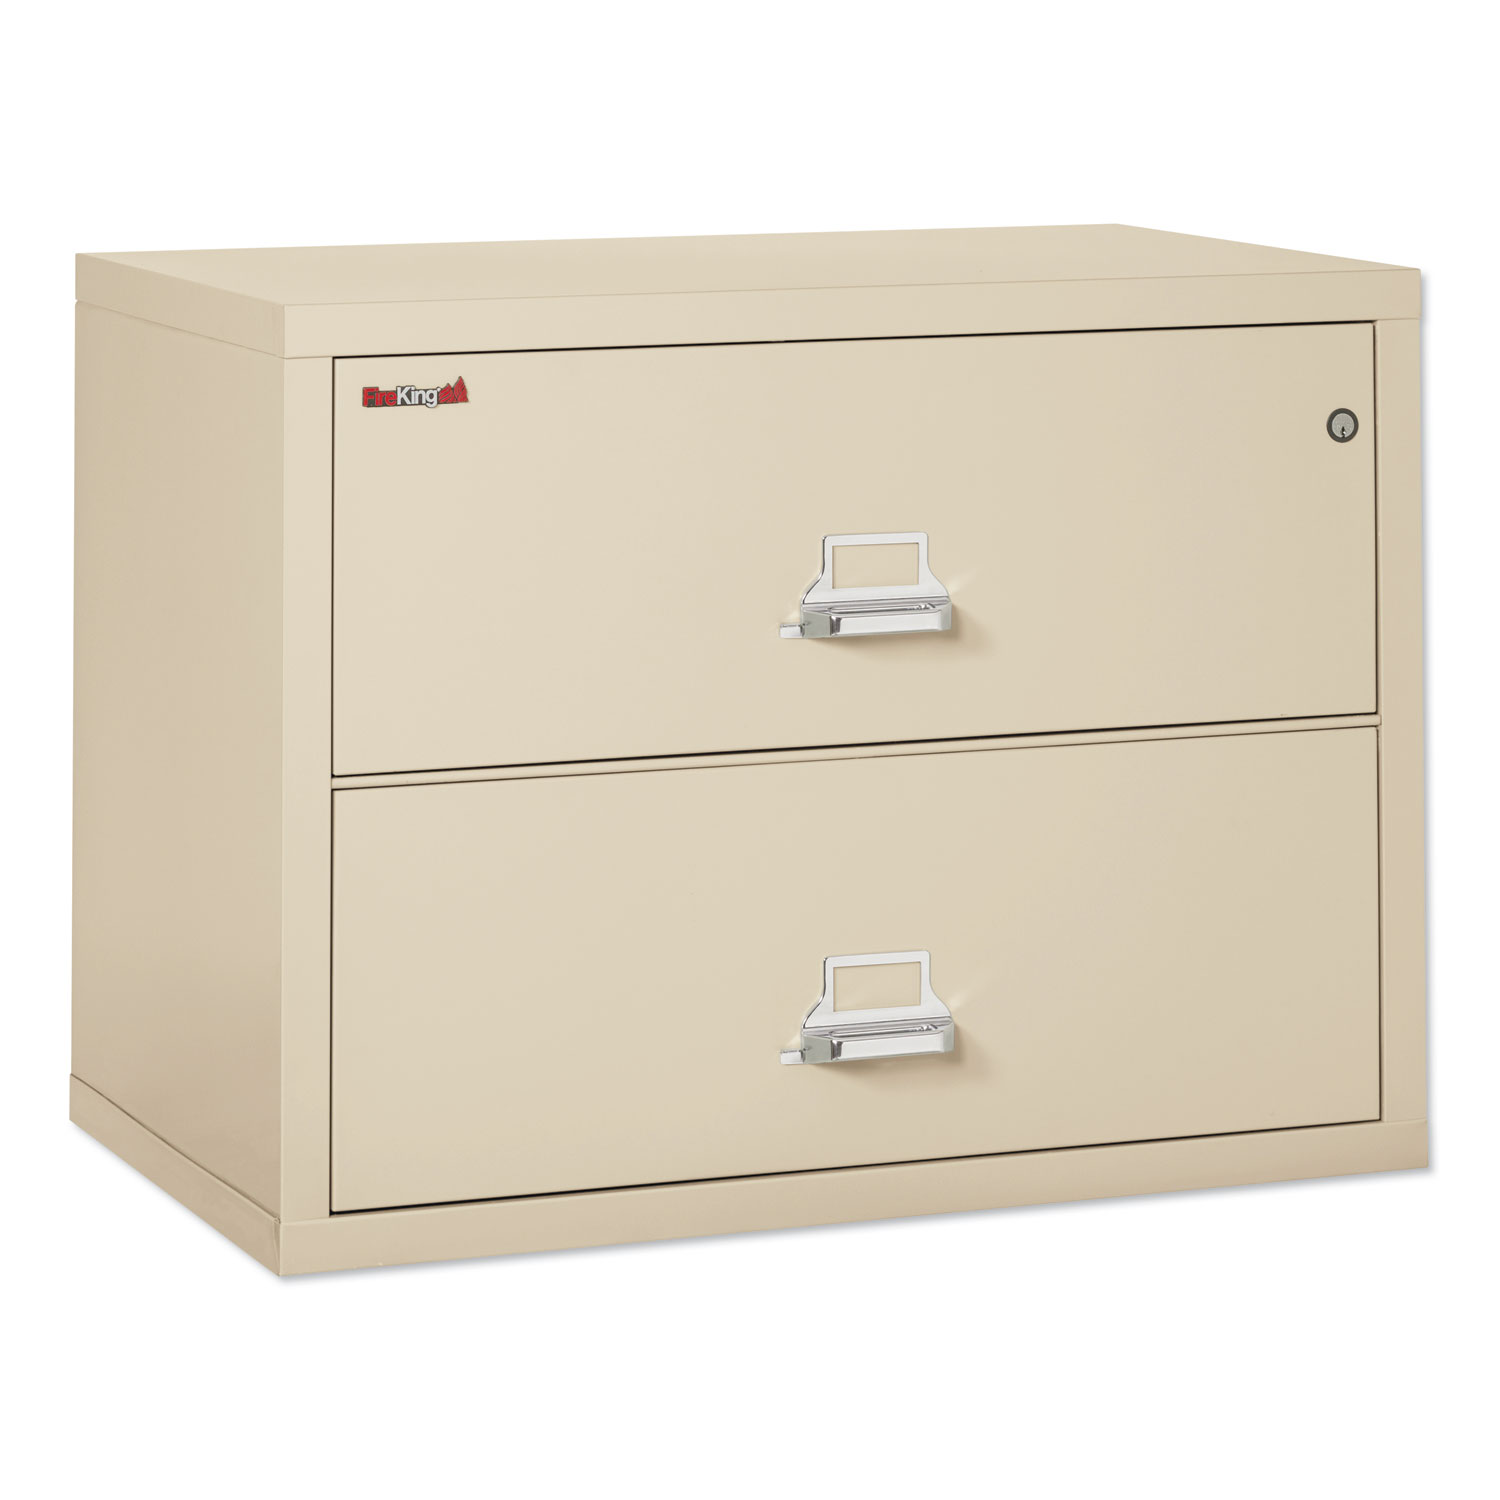 Two-Drawer Lateral File, 37 1/2w x 22 1/8d, UL Listed 350, Ltr/Legal, Parchment